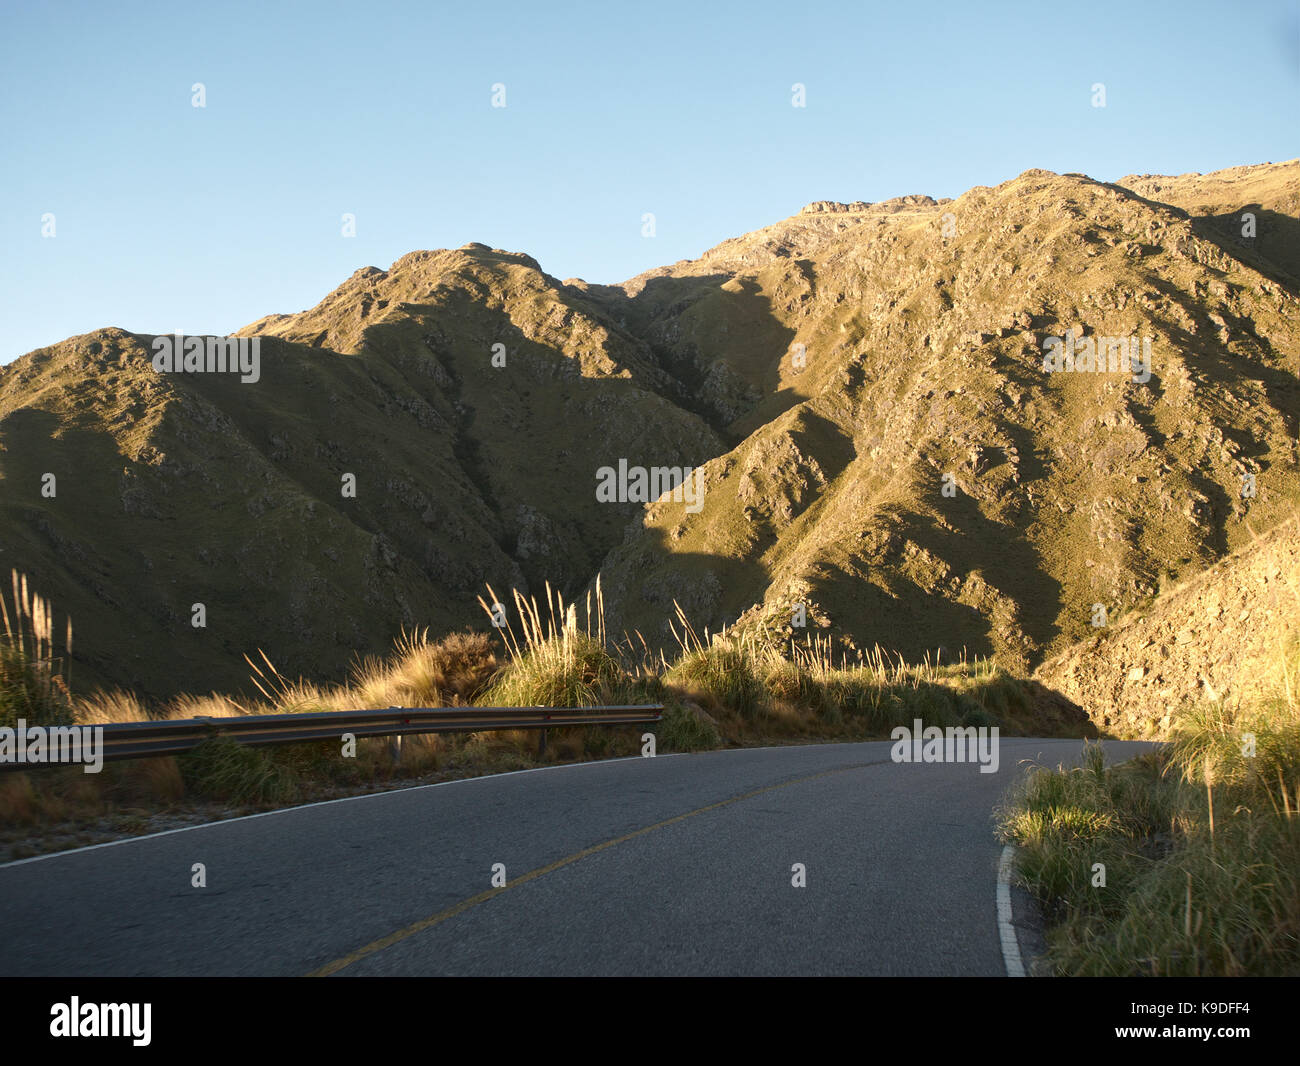 Villa de Merlo, San Luis, Argentina - 2017: The view on the road from Merlo to 'El Filo', the top of a nearby mountain. Stock Photo